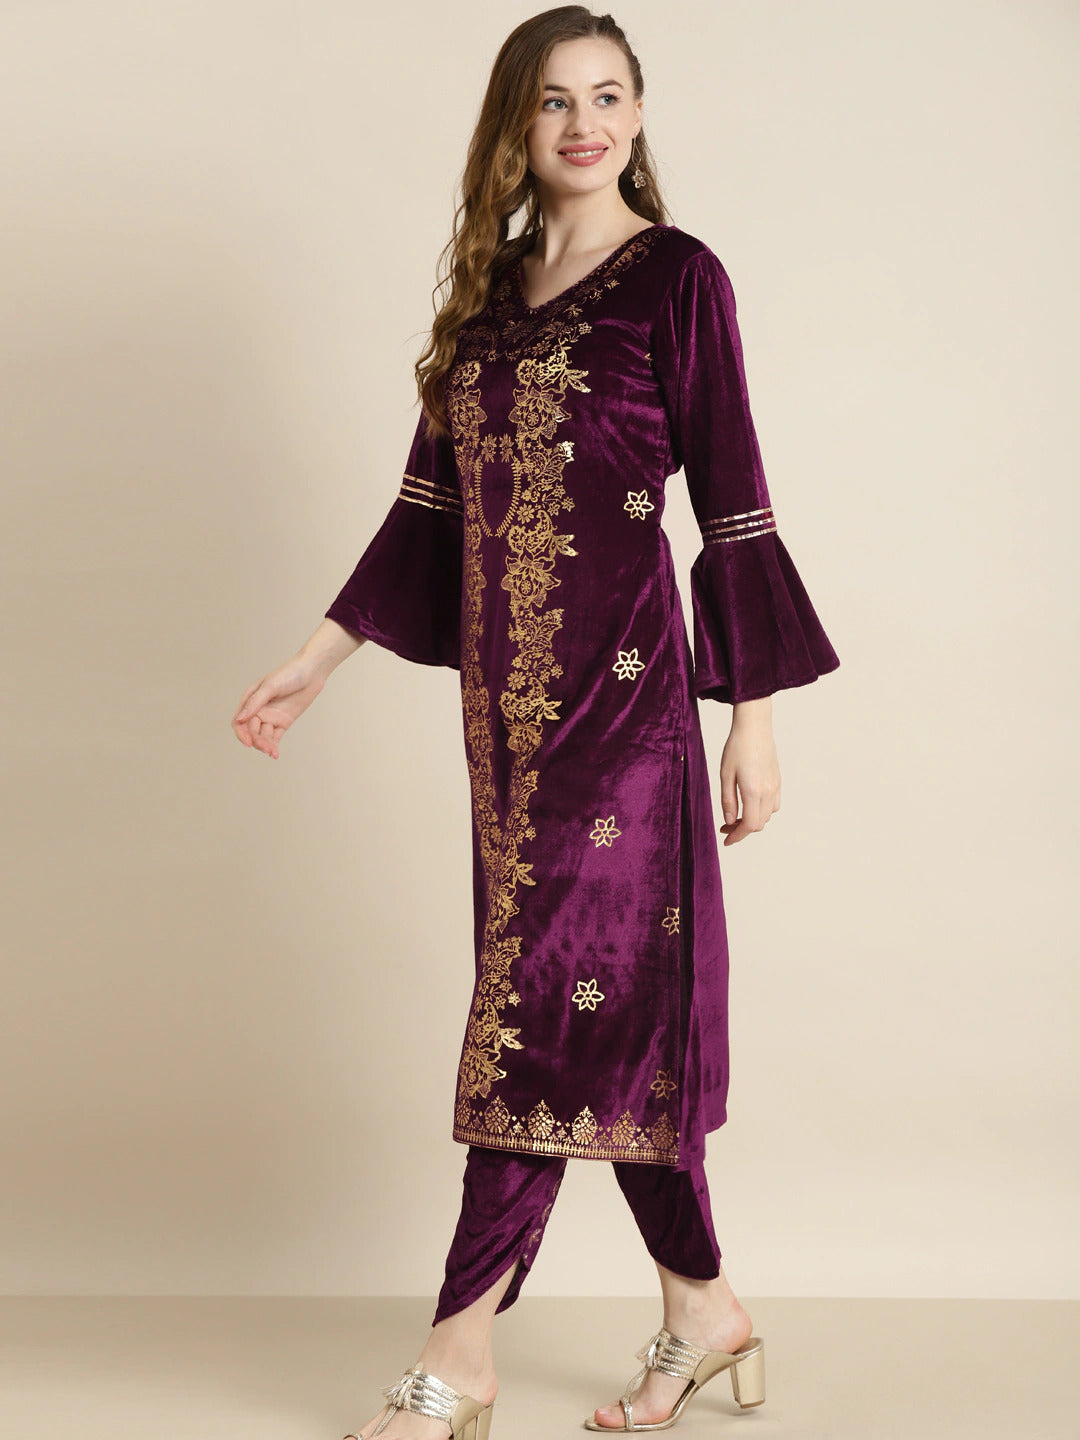 Purple & Gold Velvet Kurta - Indian Clothing in Denver, CO, Aurora, CO, Boulder, CO, Fort Collins, CO, Colorado Springs, CO, Parker, CO, Highlands Ranch, CO, Cherry Creek, CO, Centennial, CO, and Longmont, CO. Nationwide shipping USA - India Fashion X